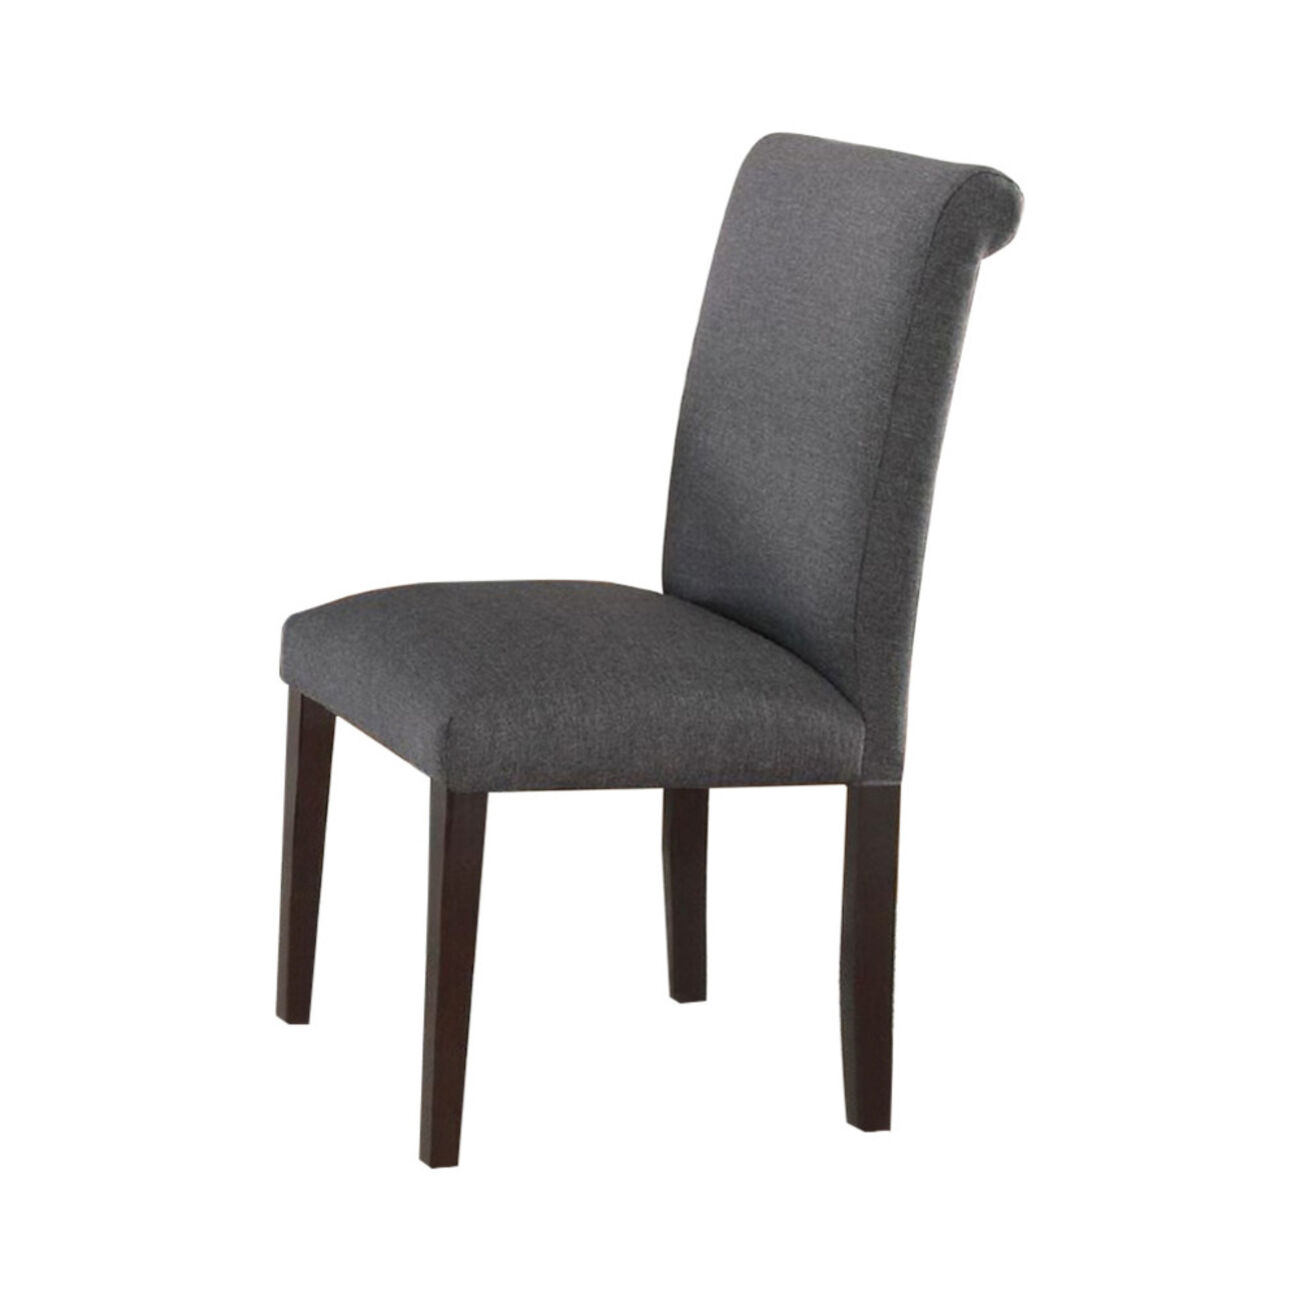 Set Of 2 Solid Wood Dining Chair In Gray Upholstery